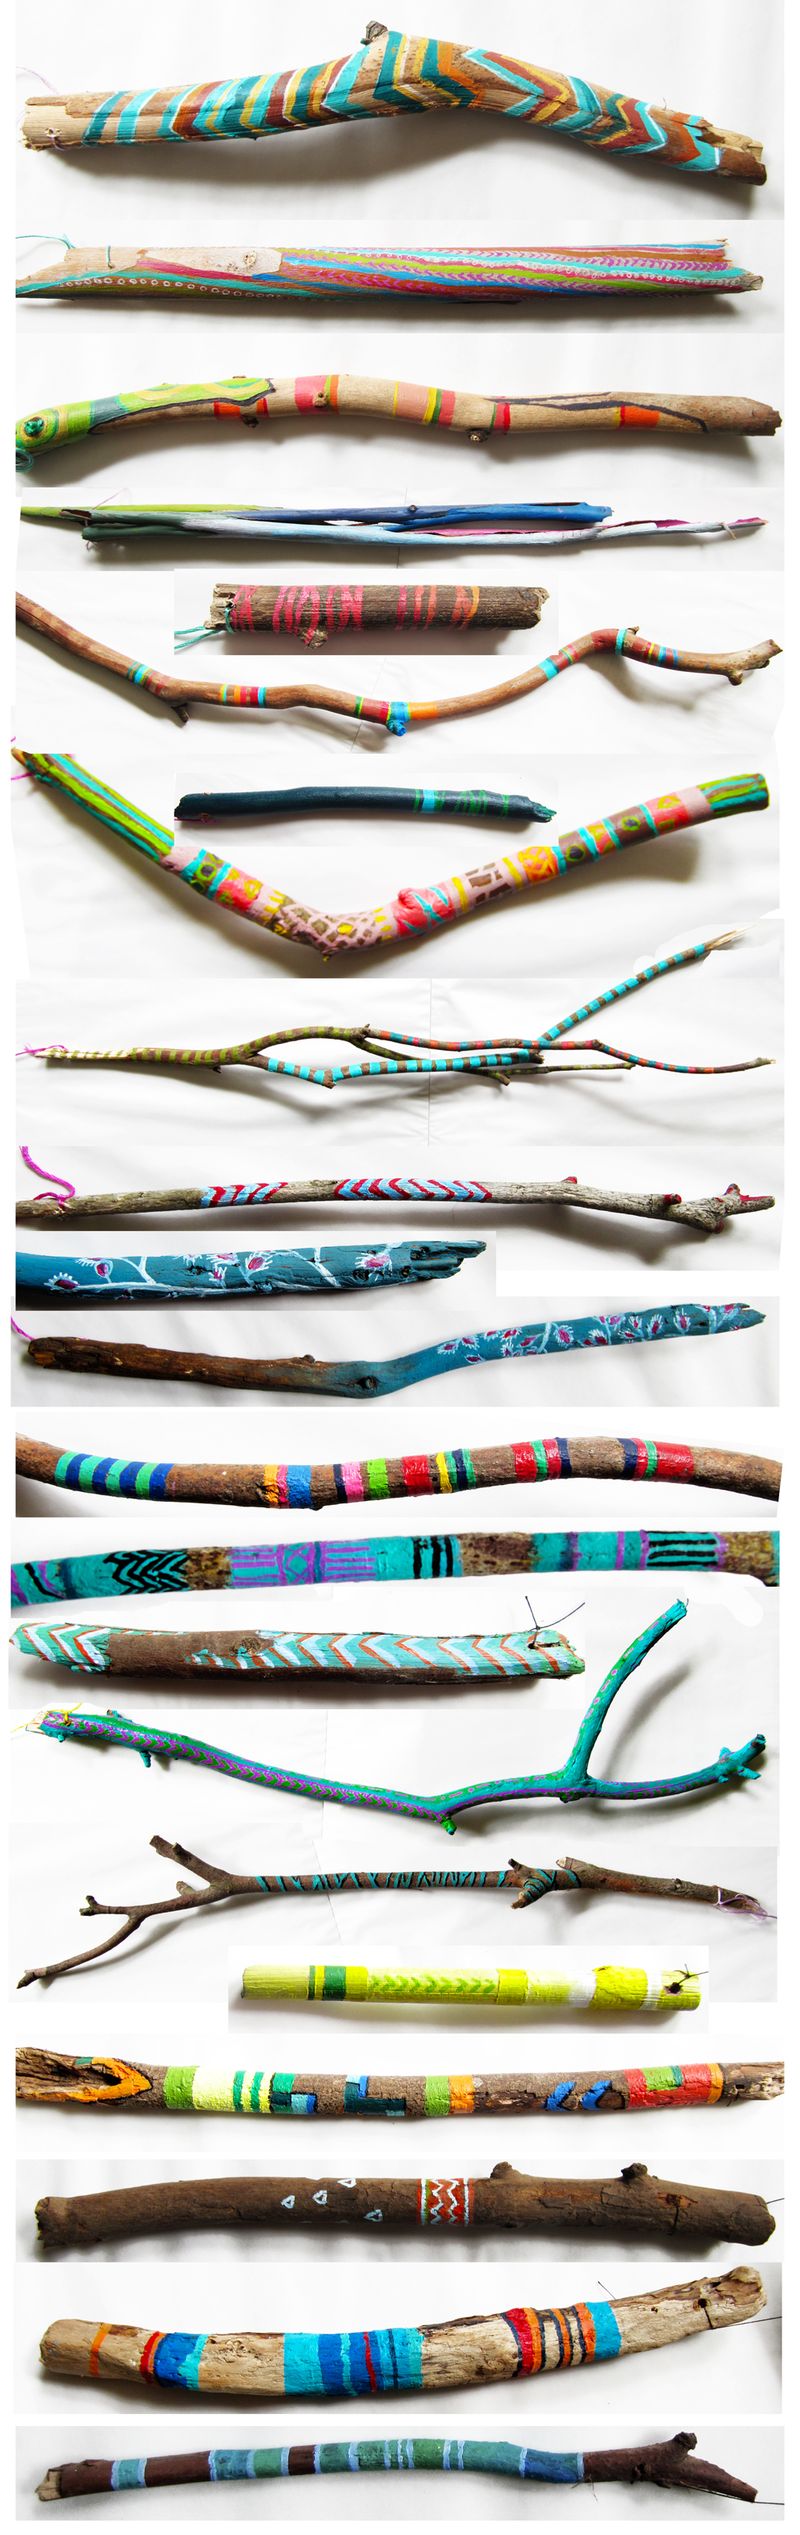 Painted Sticks Craft - DIY Inspiration - Nature Crafts for Kids | Small for Big